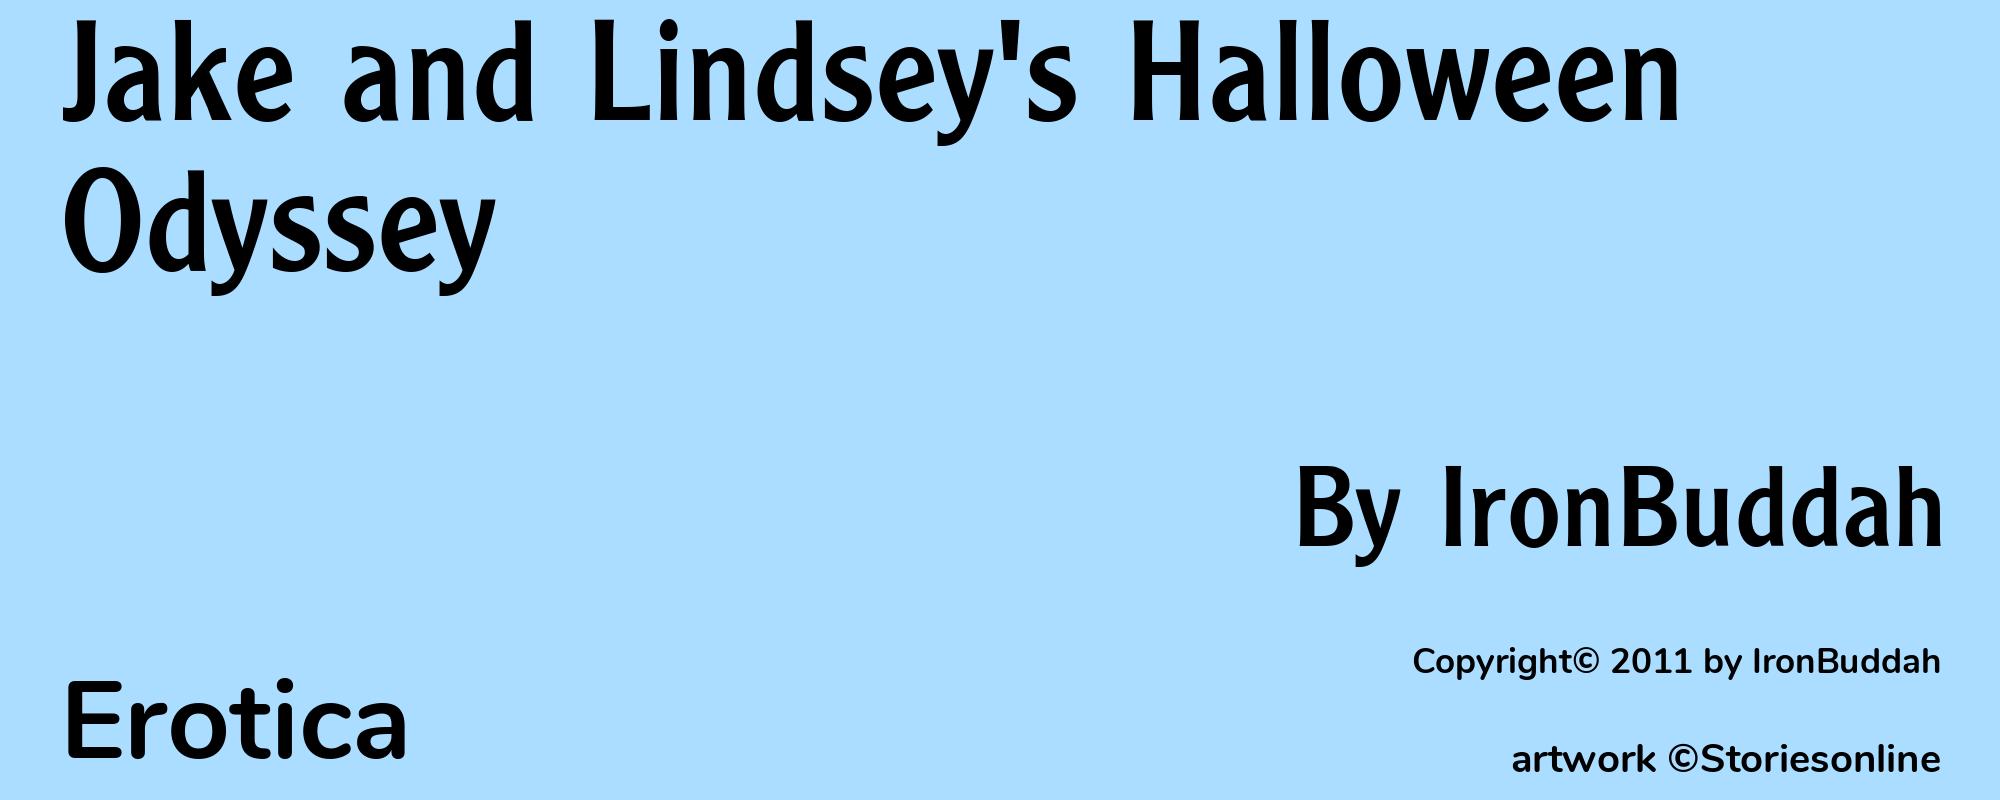 Jake and Lindsey's Halloween Odyssey - Cover